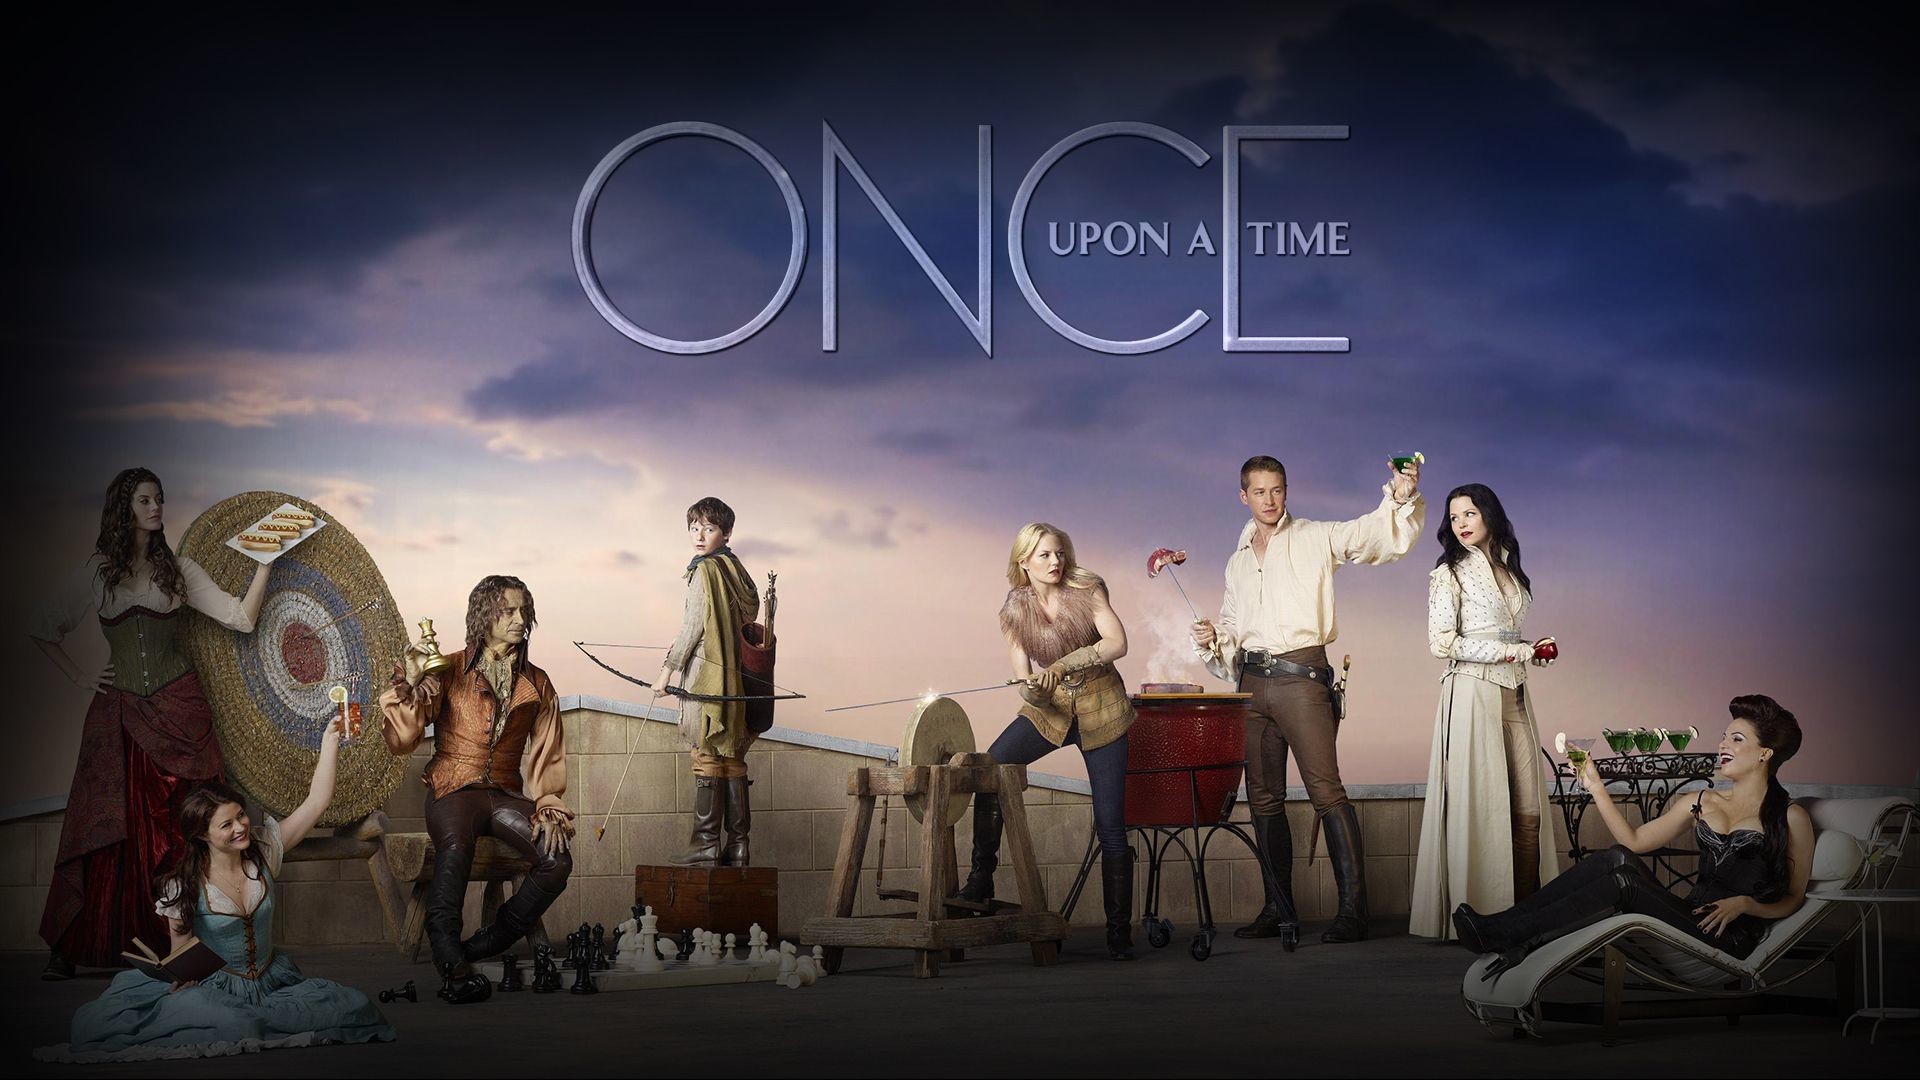 1920x1080 The Magic of Once Upon a Time